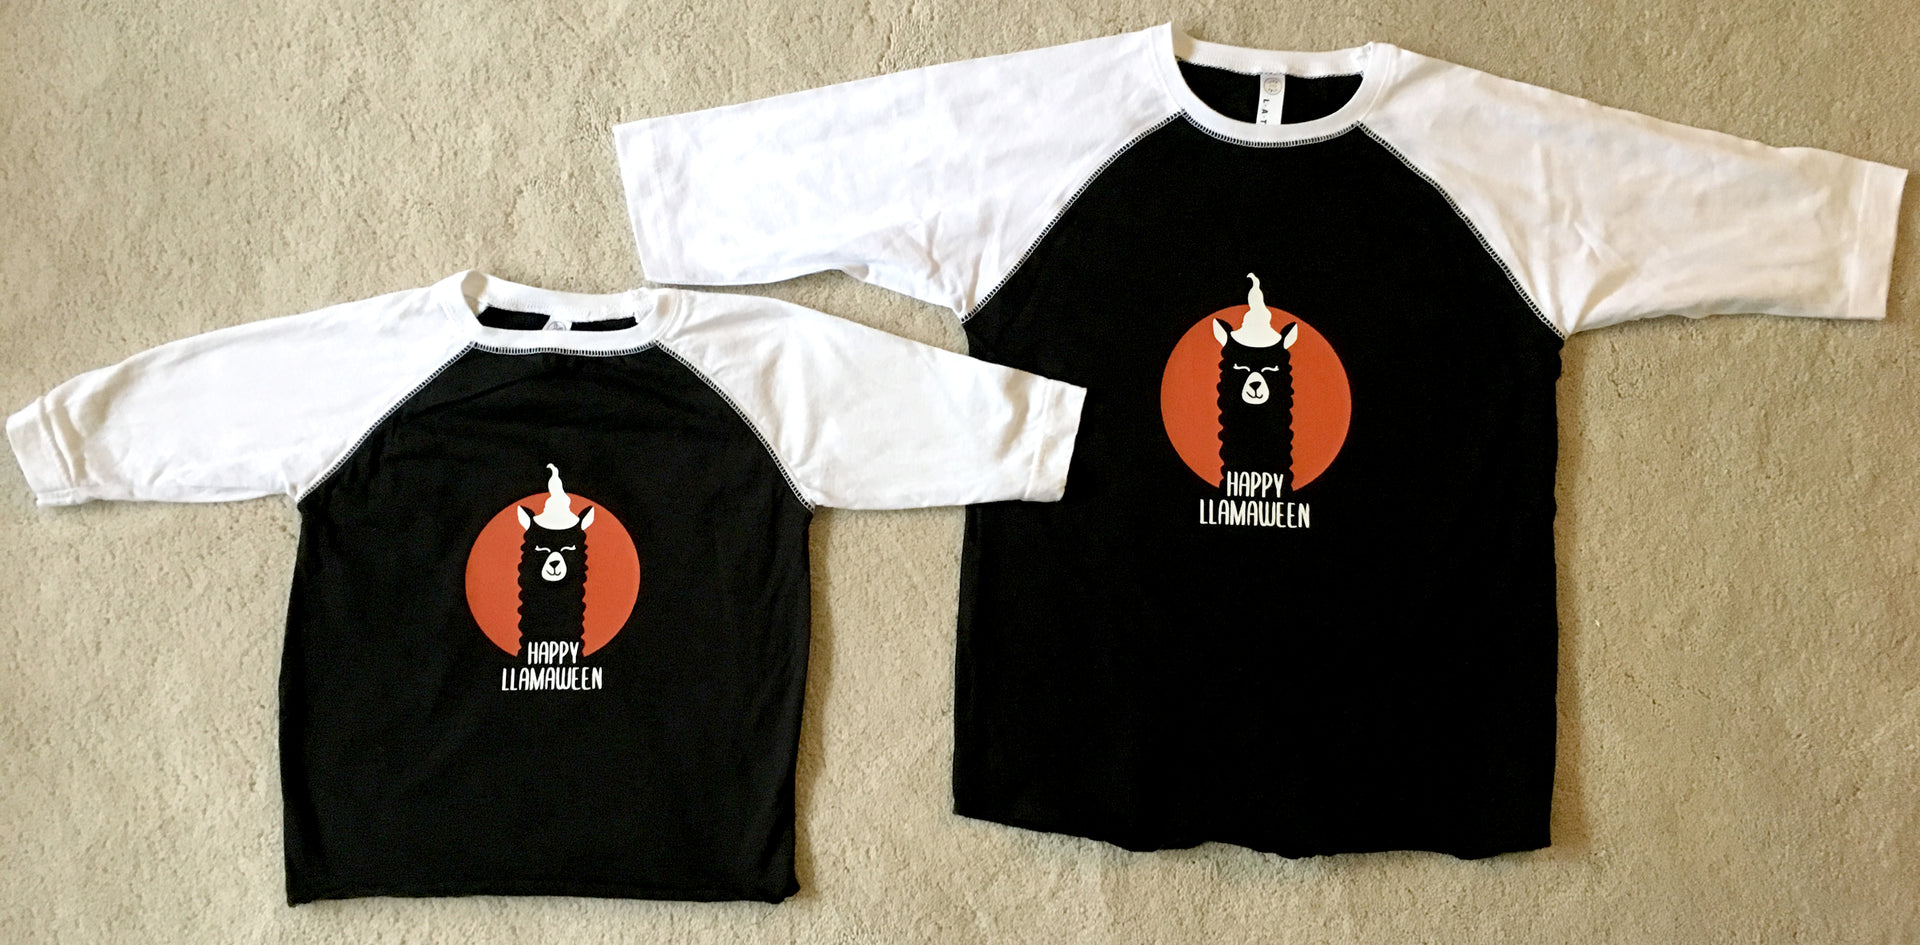 Make Your Own Halloween Shirts with Cricut Iron-On